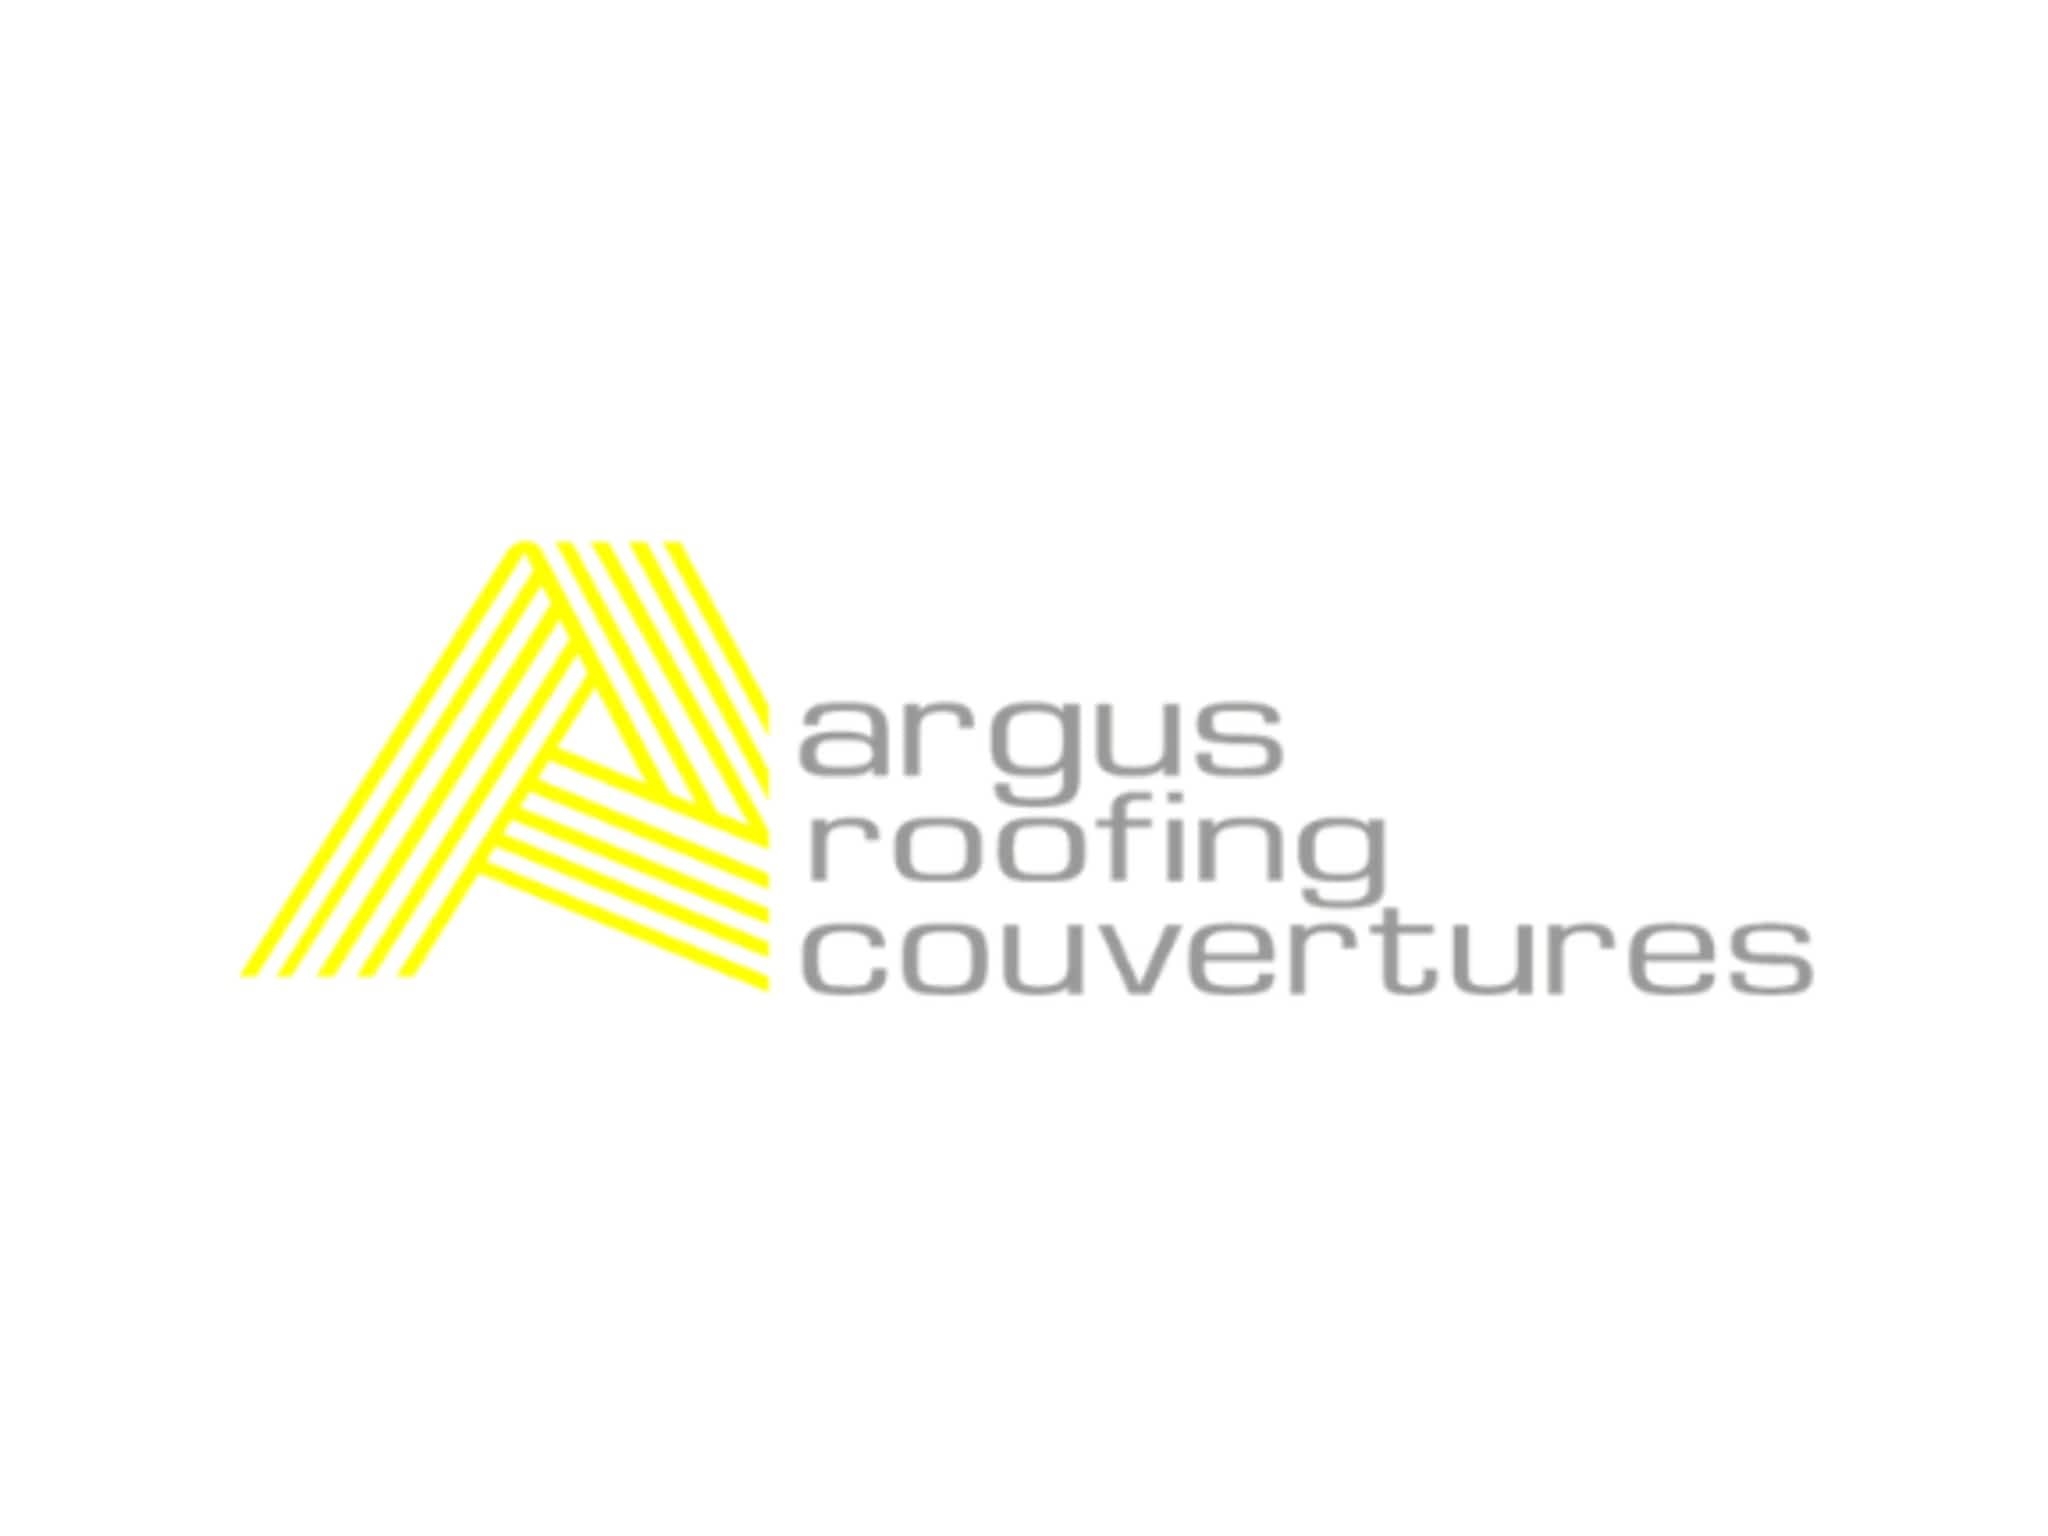 photo COUVERTURES ARGUS ROOFING